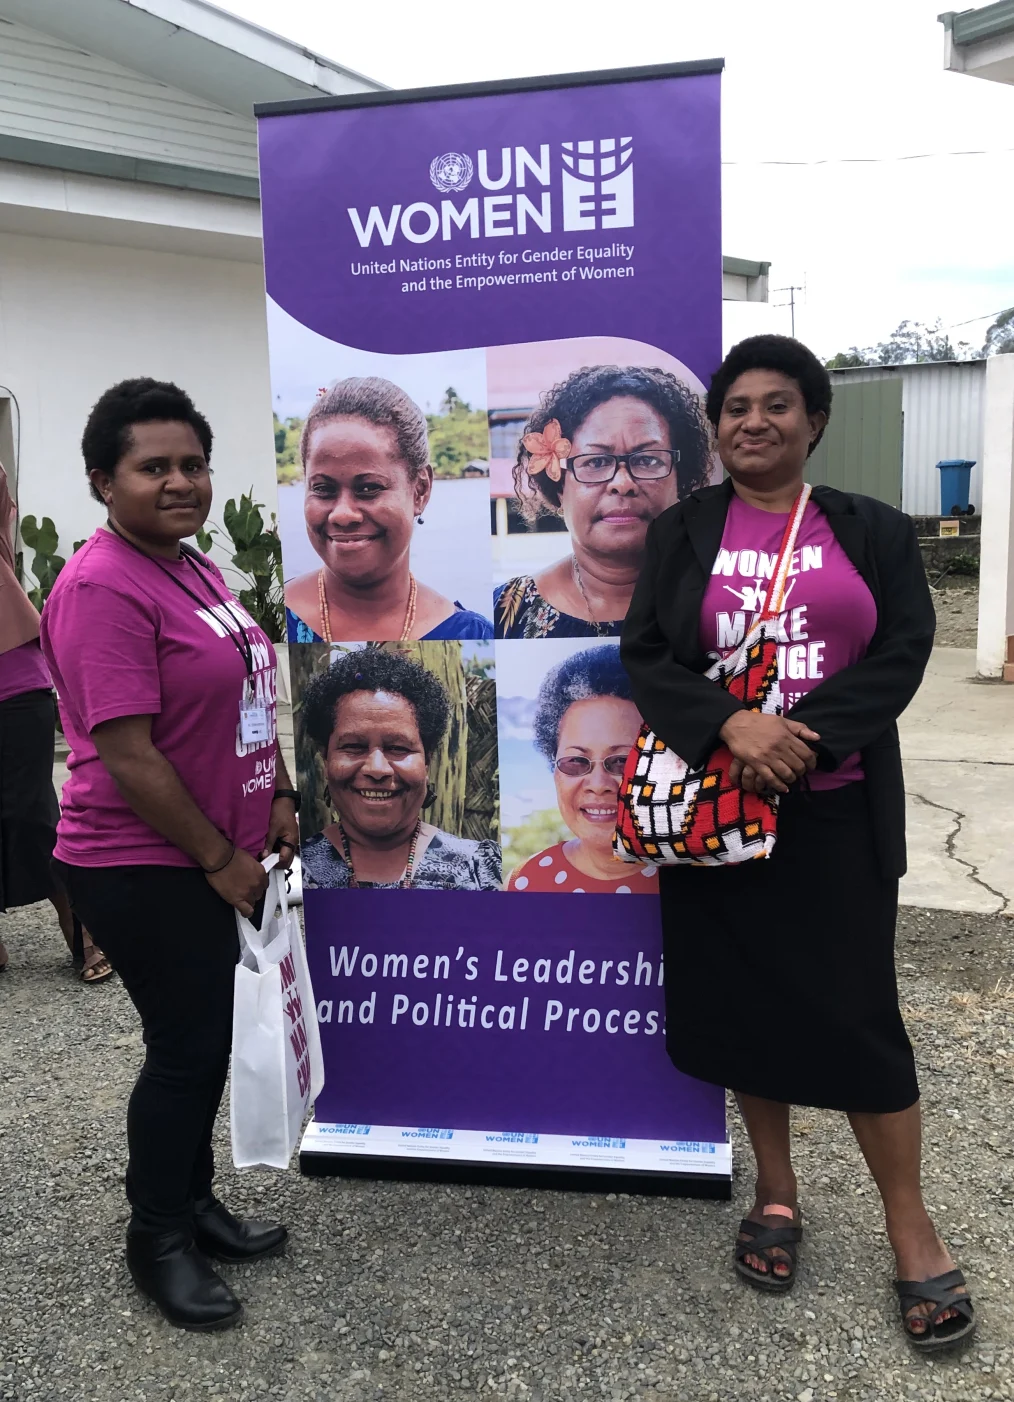 Emma Minimbi, a woman with a medium deep skin tone, holds a closed lip smile as she stands to the left of a UN Women sign. Posing on the right is a woman with a medium deep skin tone with a closed lip smile. Both women have short hair and are wearing purple shirts that read, “Women make change.” The UN Women signage reads, “UN Women, United Nations Entity for Gender Equity and empowerment of women, and Women’s leadership and political process.”